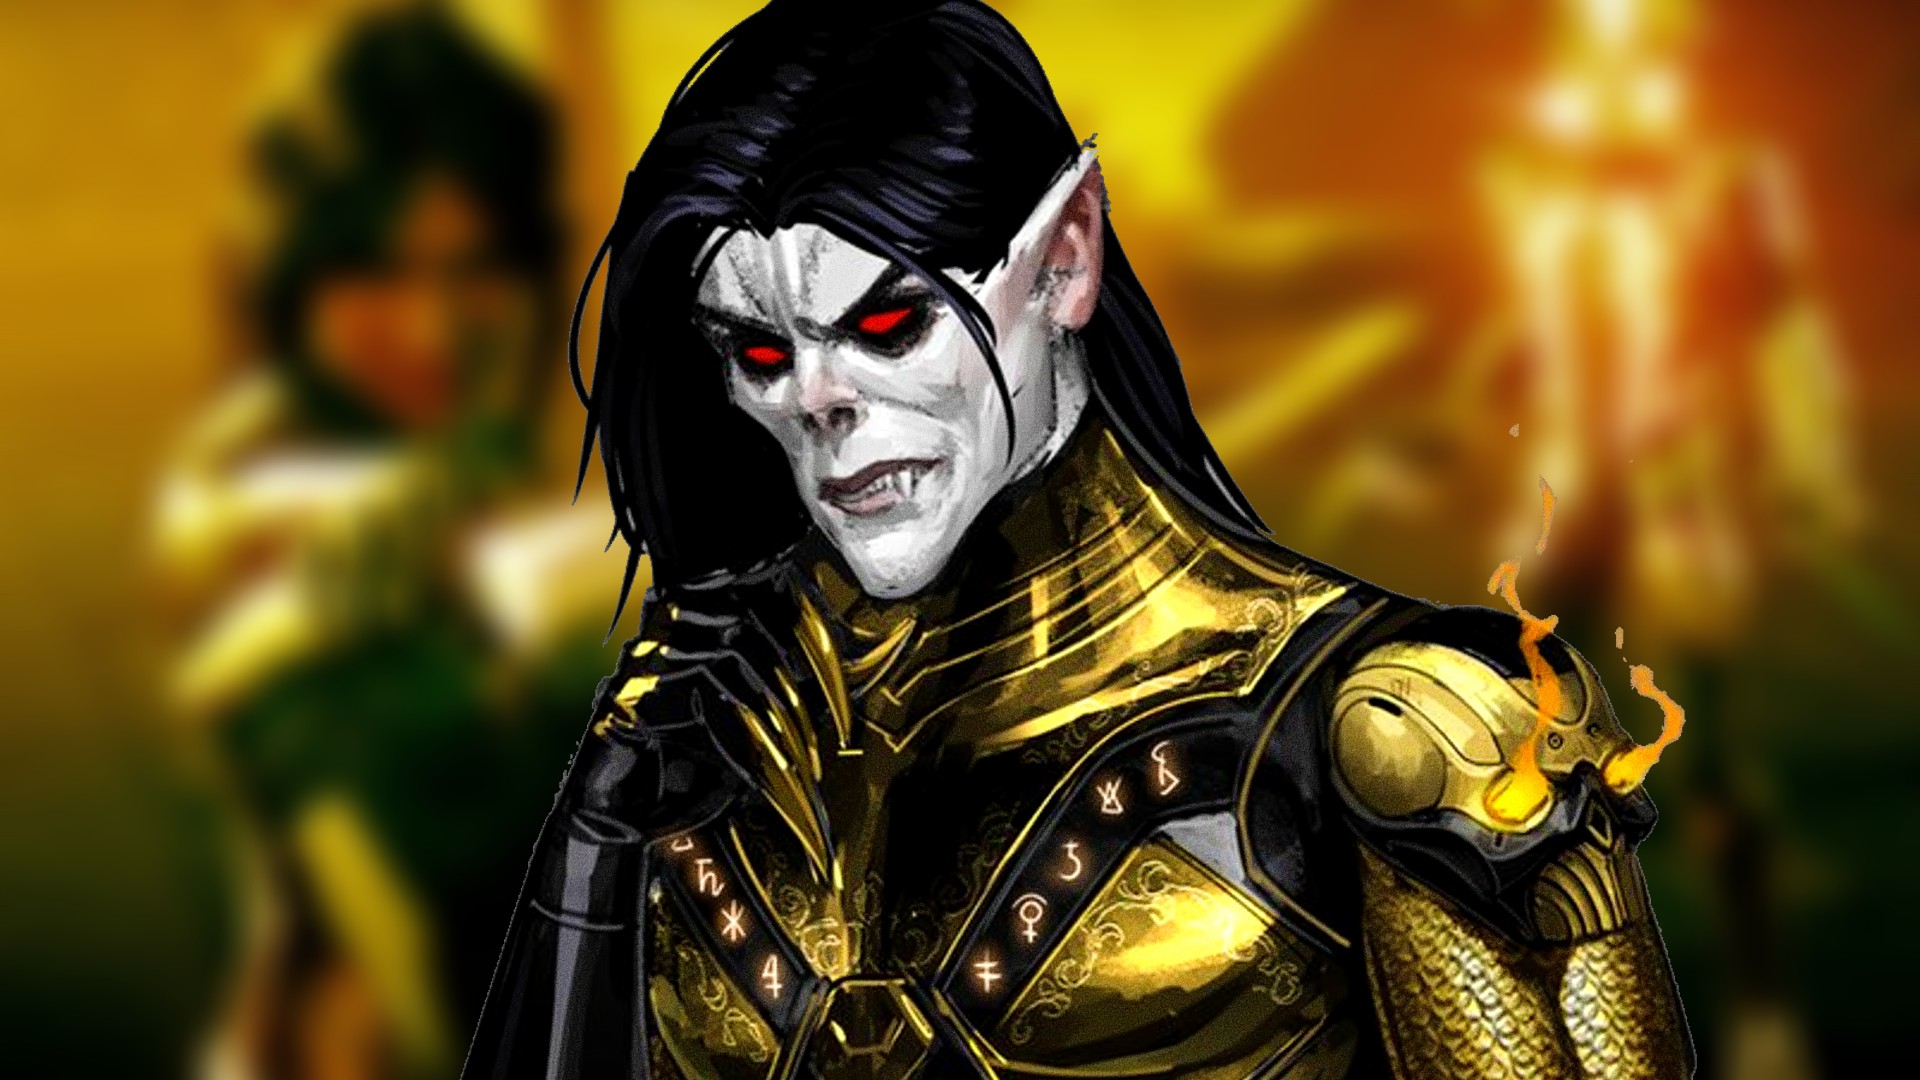 Morbius Joins the Midnight Suns in a New DLC Expansion